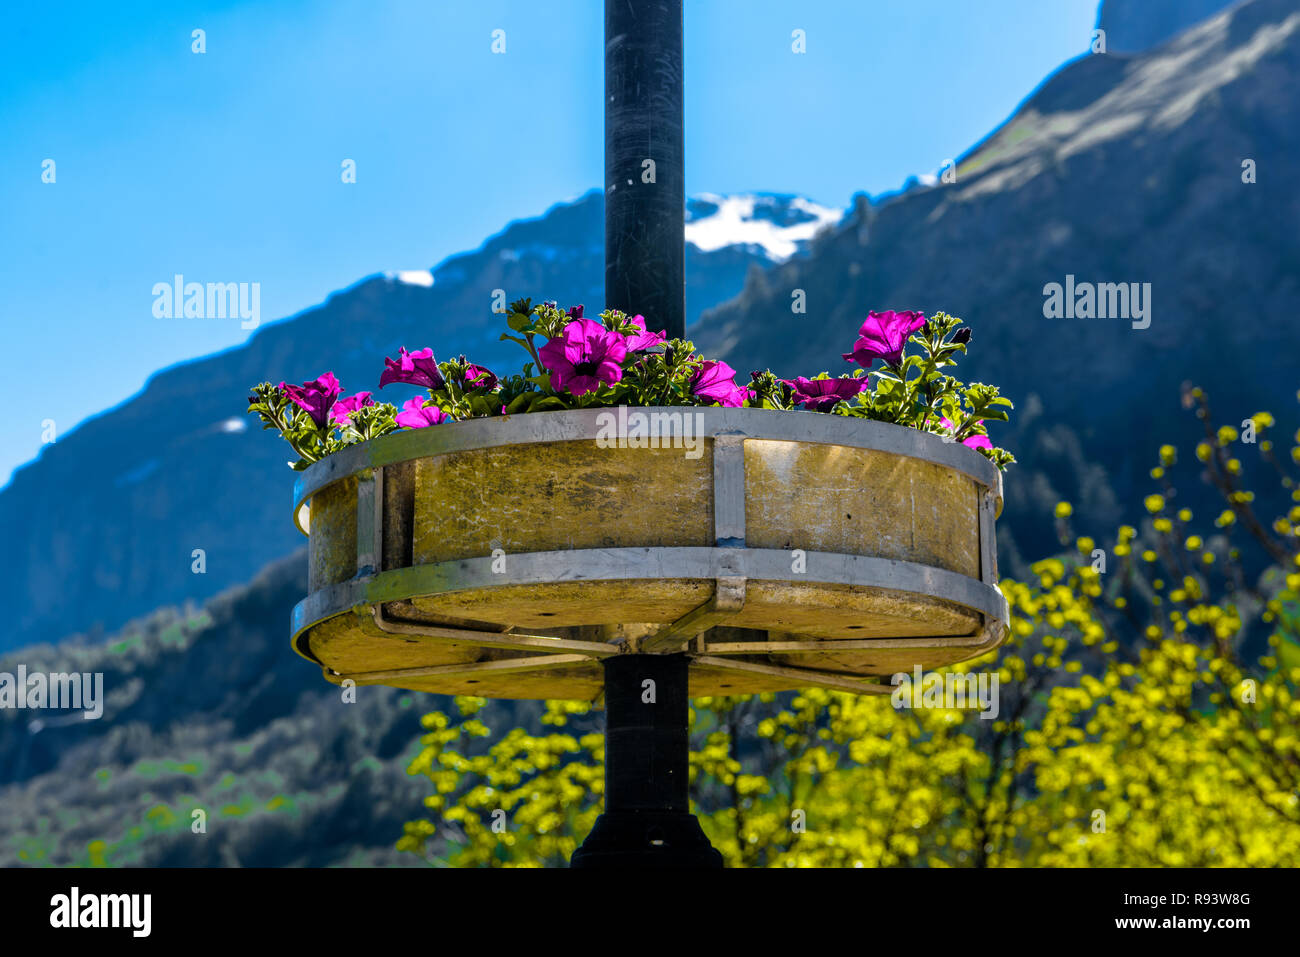 Violets flowers on the column with Alp mountains in background, Switzerland Stock Photo